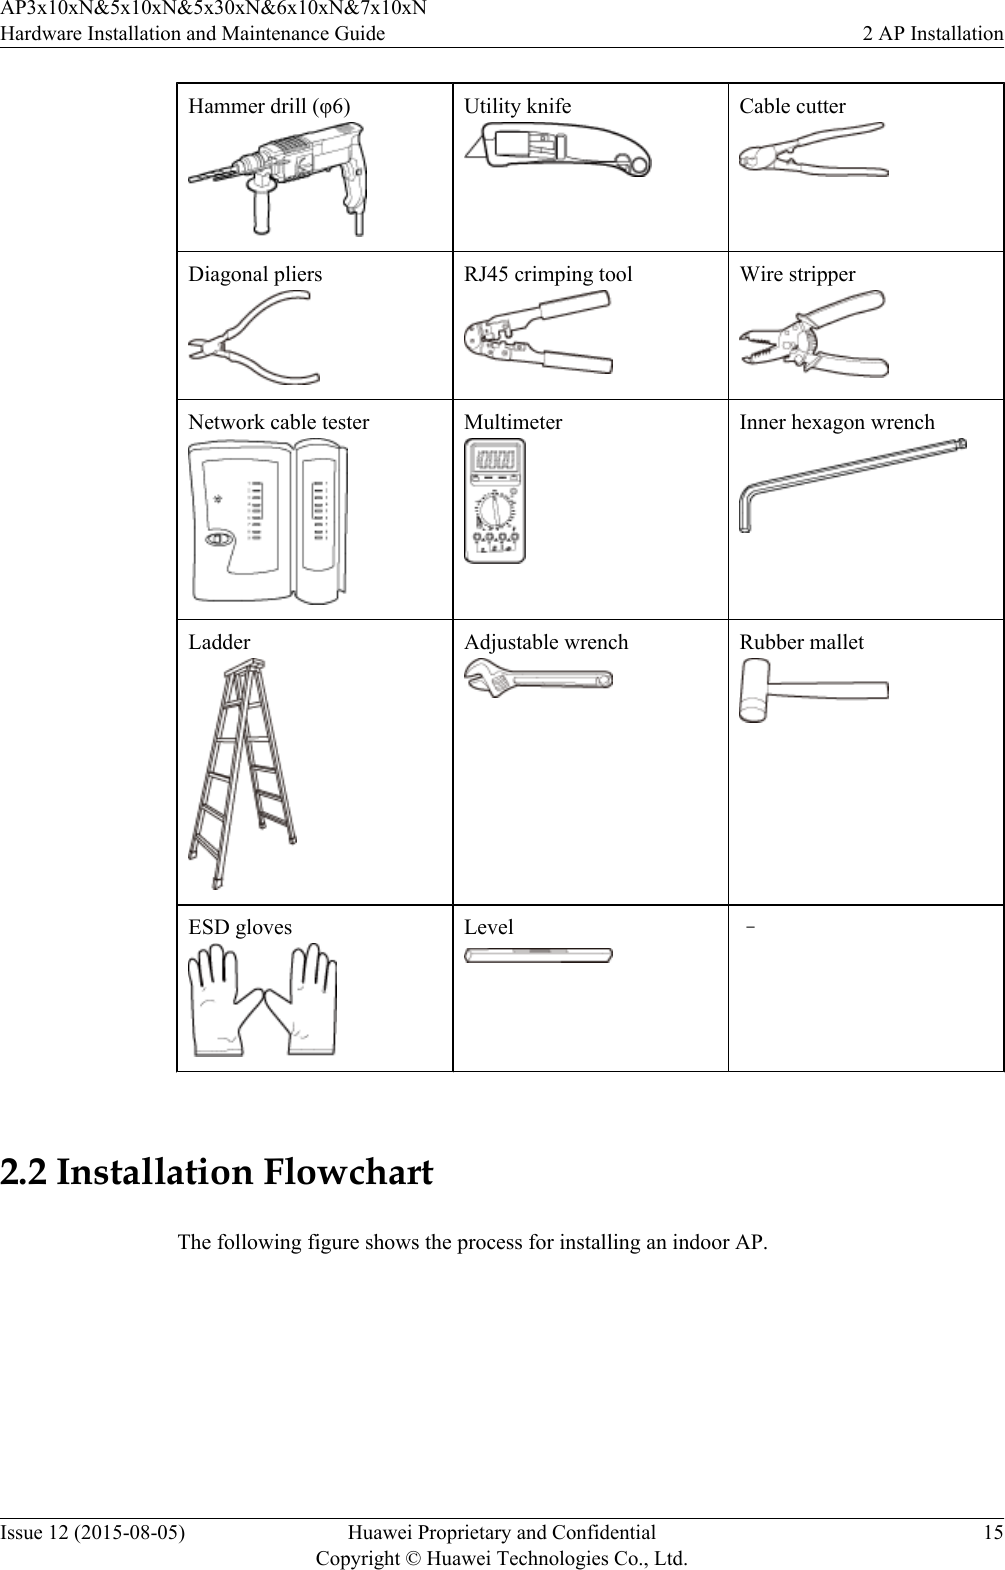 Hammer drill (φ6) Utility knife Cable cutterDiagonal pliers RJ45 crimping tool Wire stripperNetwork cable tester Multimeter Inner hexagon wrenchLadder Adjustable wrench Rubber malletESD gloves Level – 2.2 Installation FlowchartThe following figure shows the process for installing an indoor AP.AP3x10xN&amp;5x10xN&amp;5x30xN&amp;6x10xN&amp;7x10xNHardware Installation and Maintenance Guide 2 AP InstallationIssue 12 (2015-08-05) Huawei Proprietary and ConfidentialCopyright © Huawei Technologies Co., Ltd.15